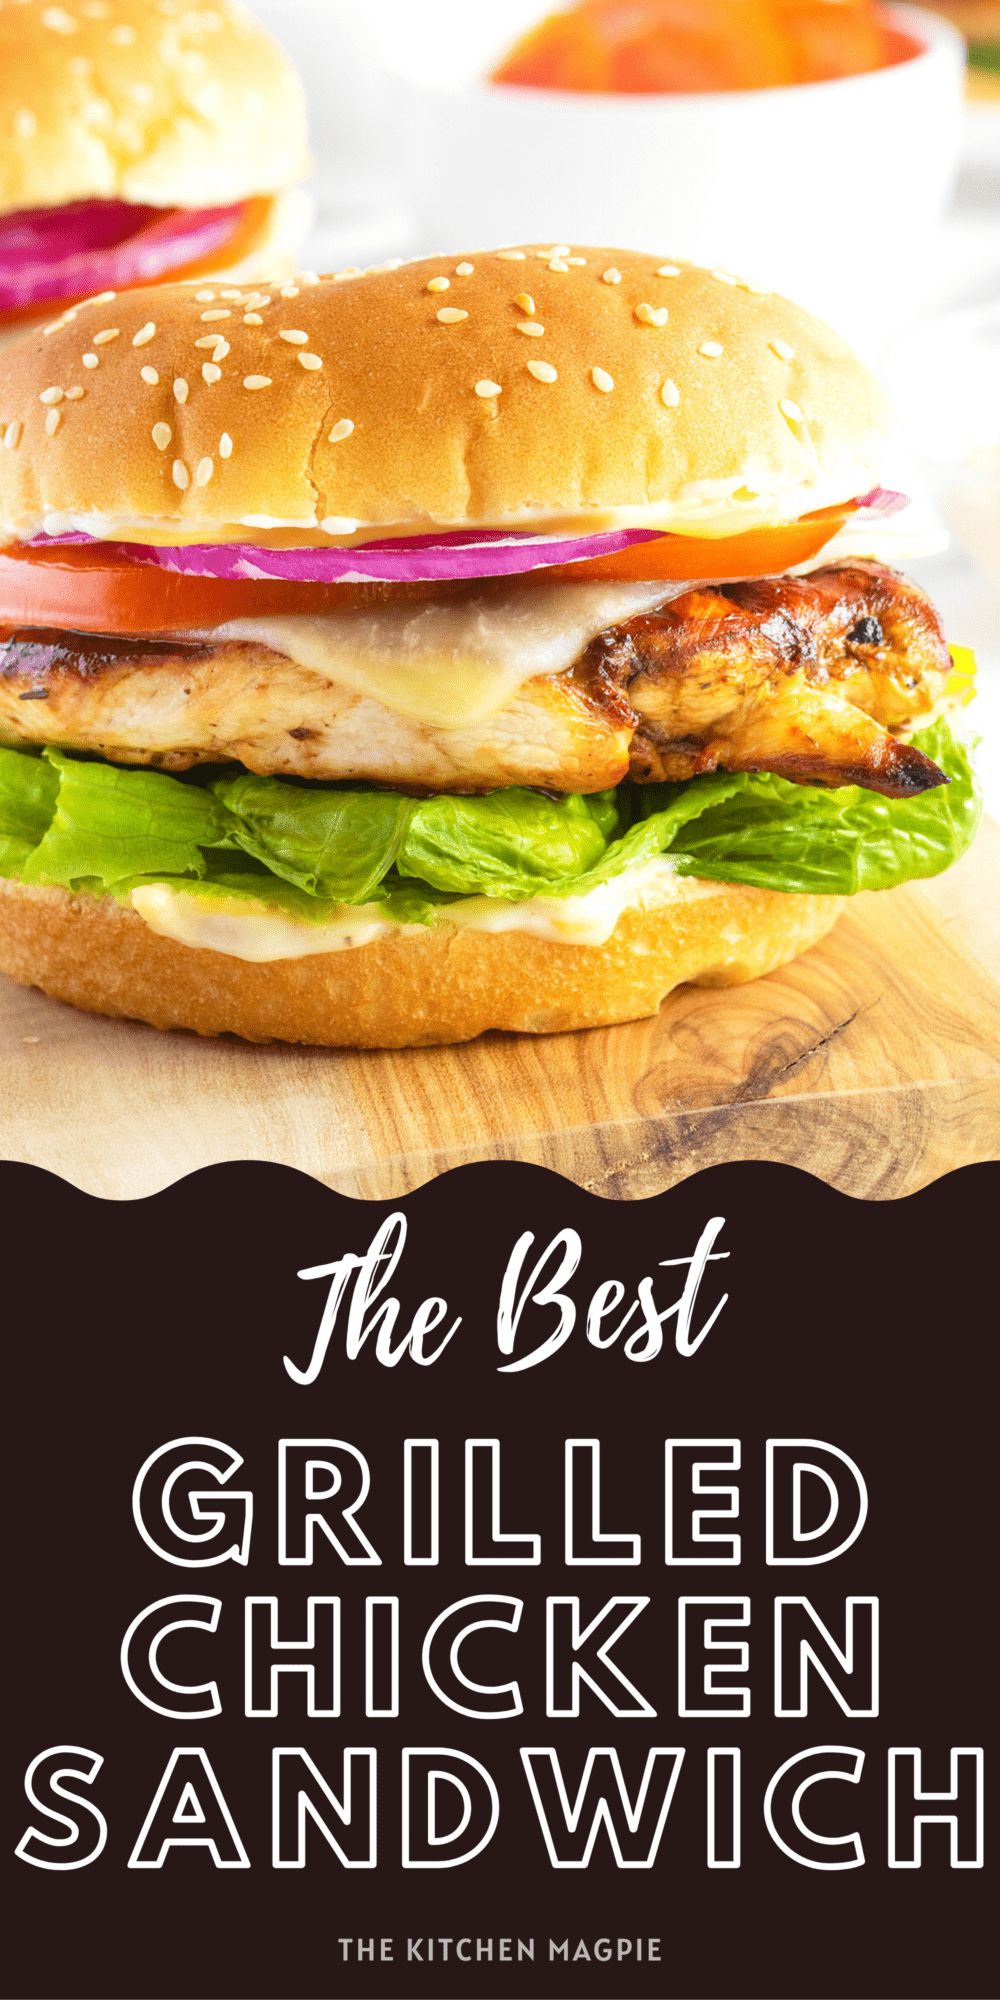 Grilled chicken is an incredibly versatile way to enjoy chicken, including in a sandwich. Perfect as a heavy snack or light lunch.